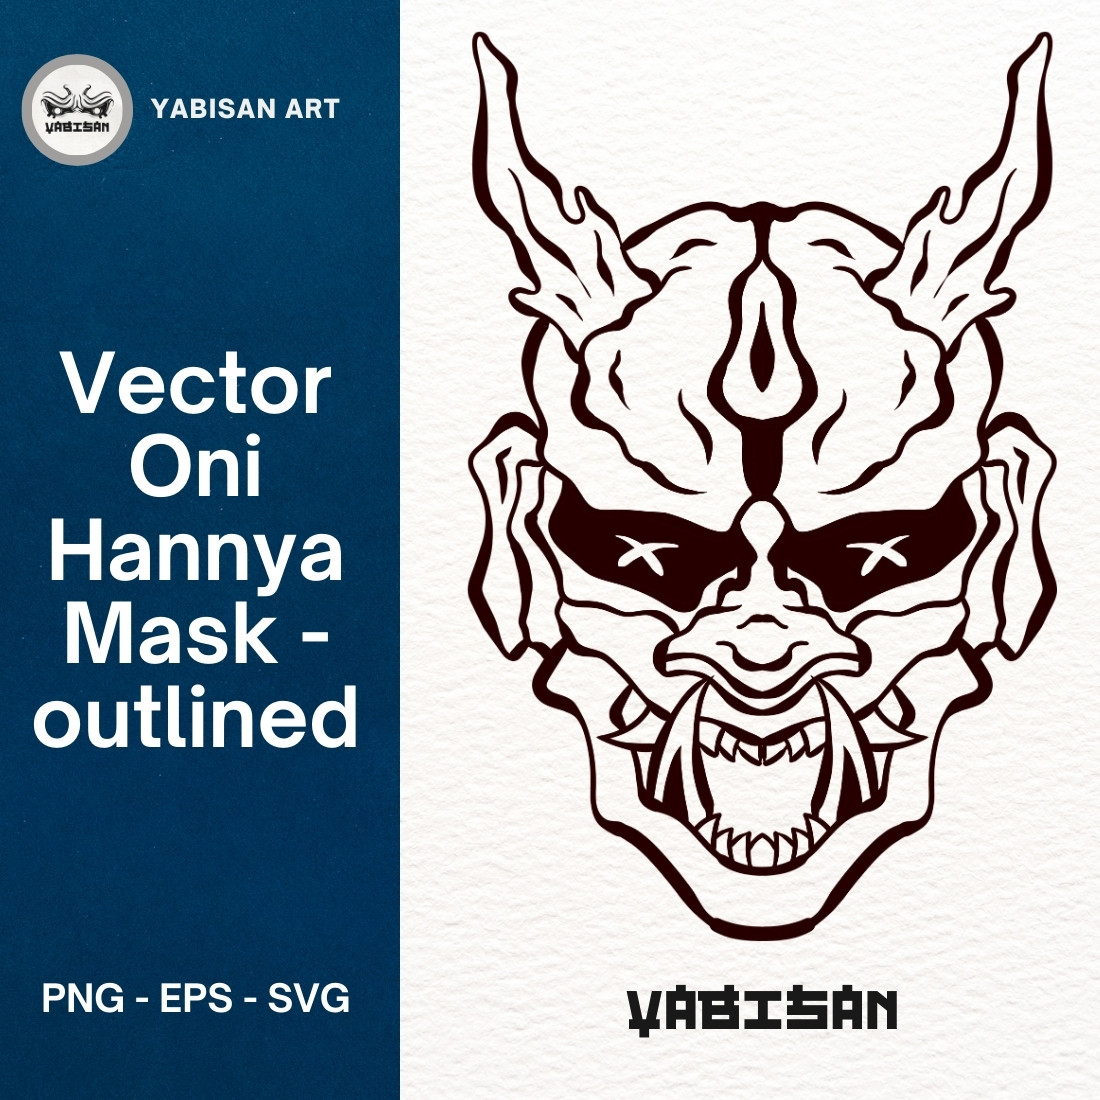 Oni Hannya Mask Art 3 – Outlined preview image.